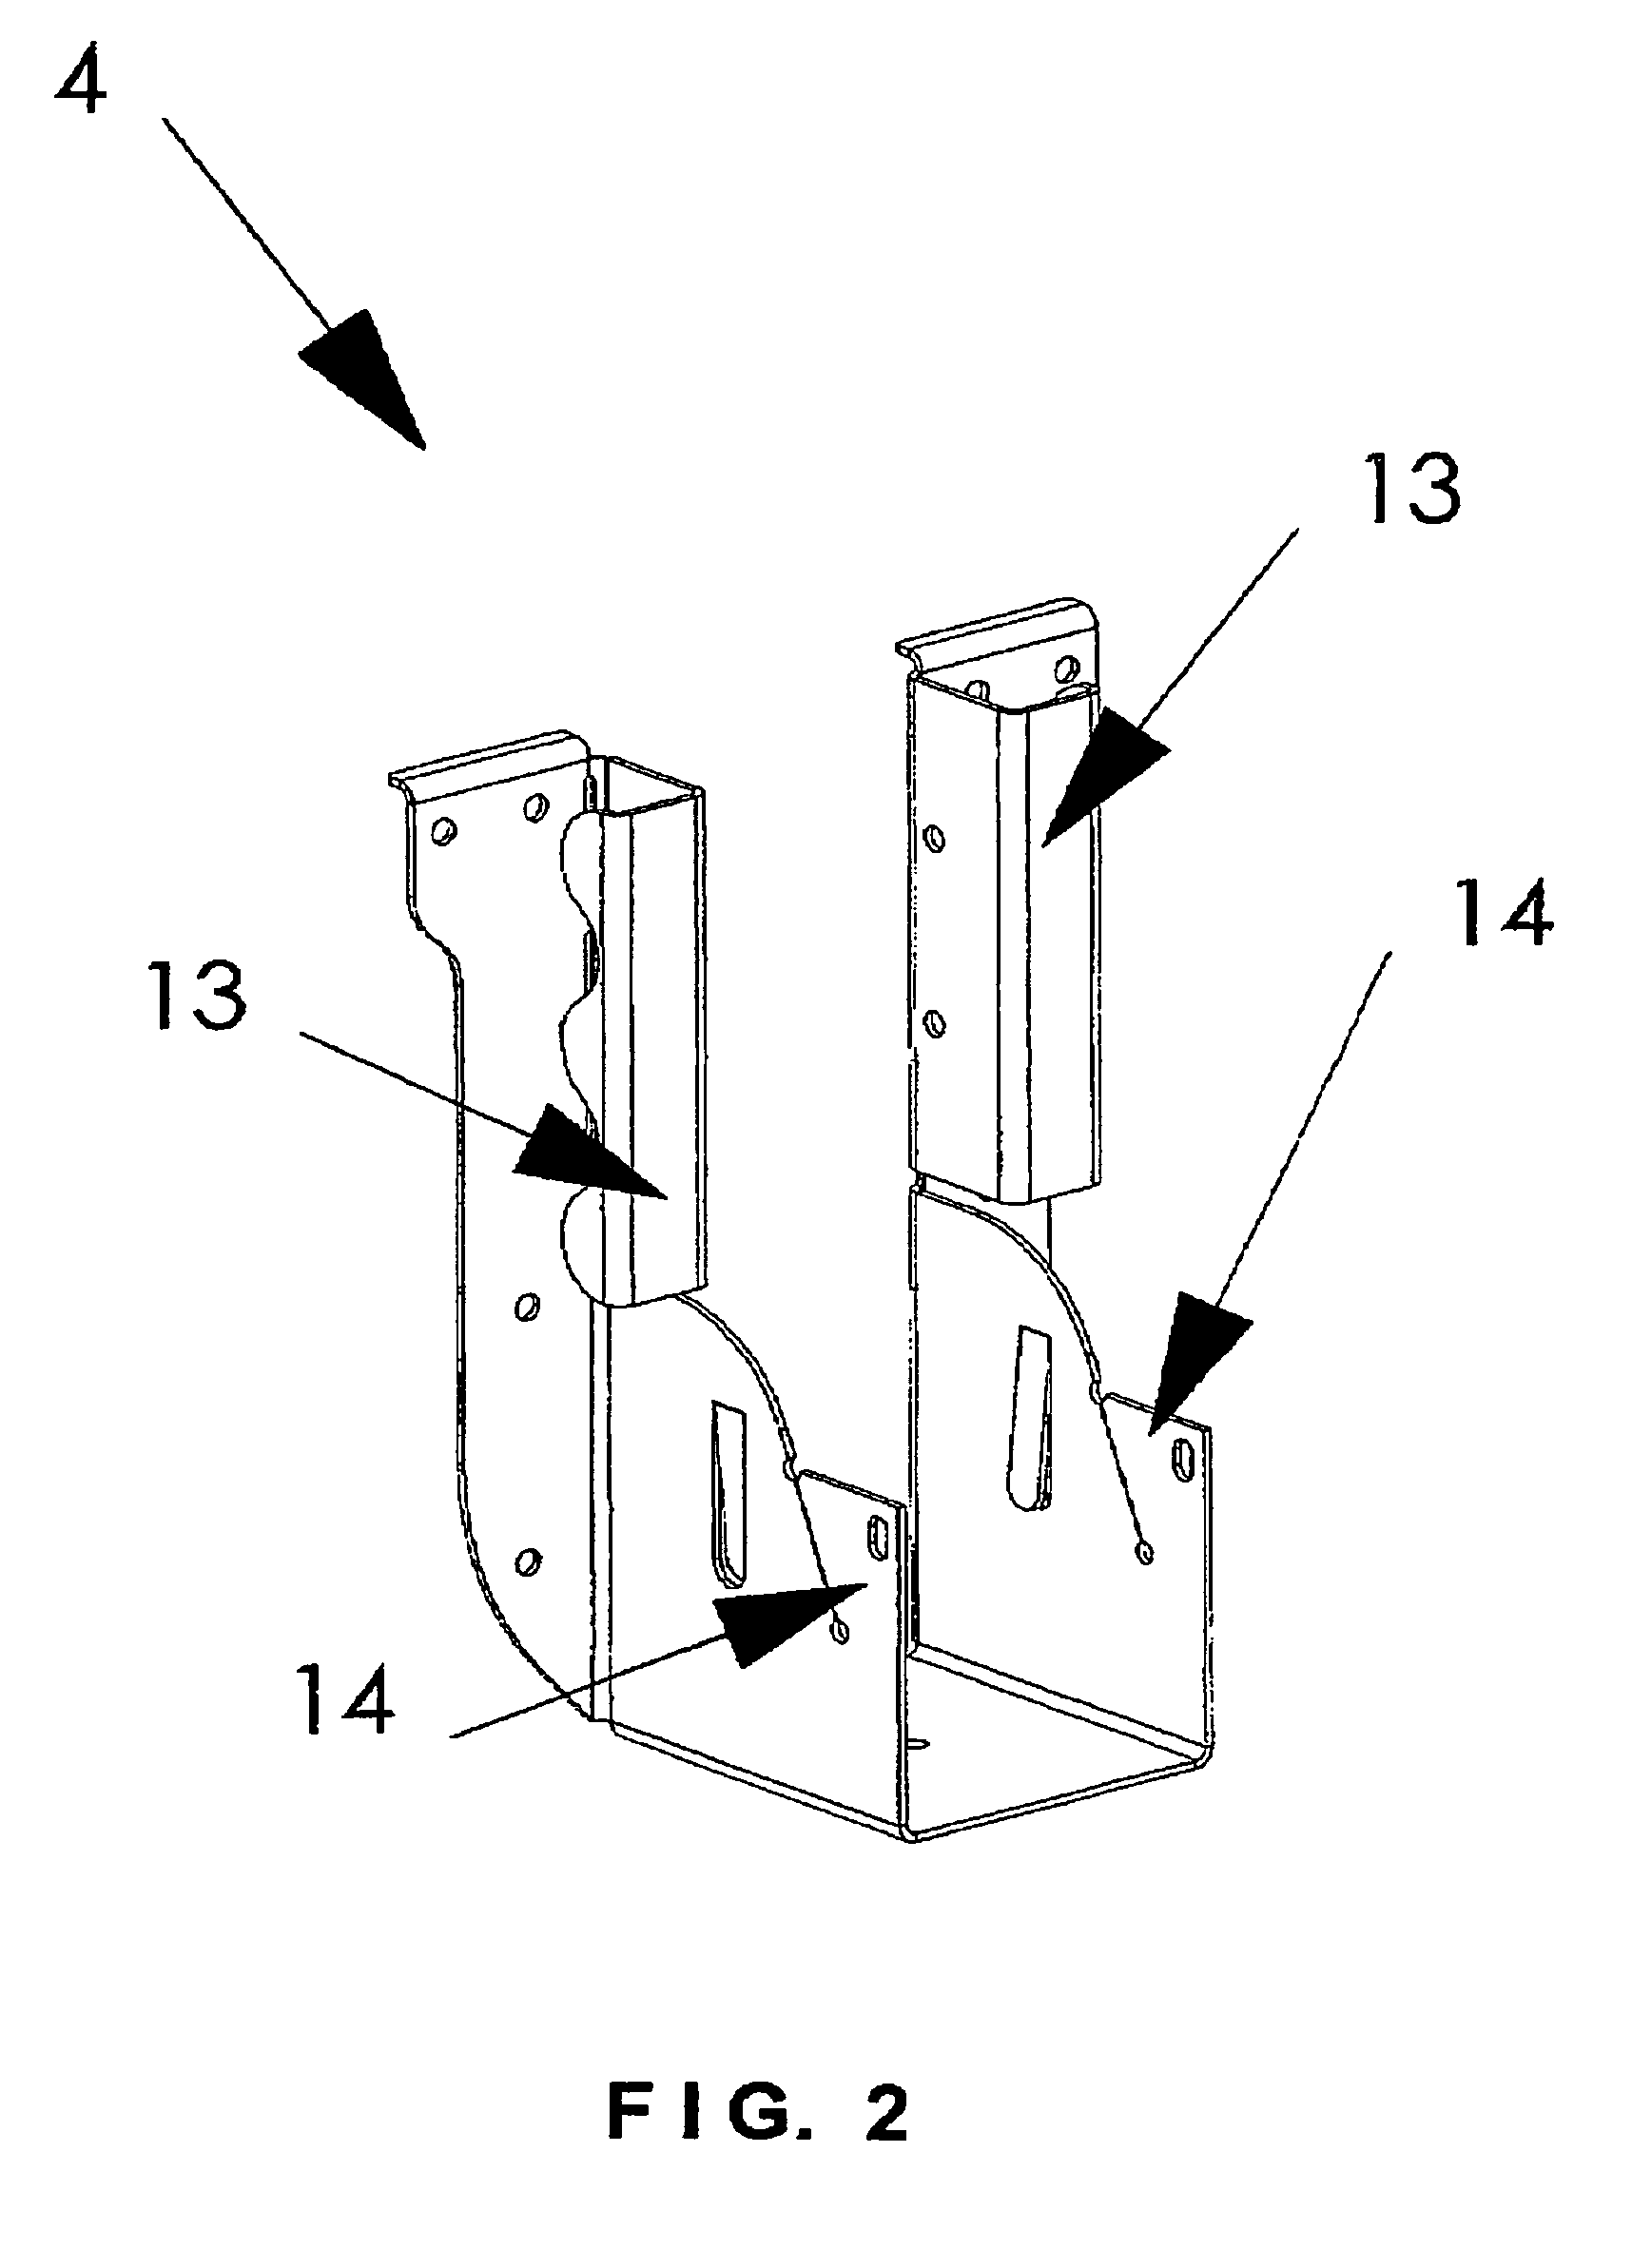 Method and system of framing components and hangers used in a structural interface